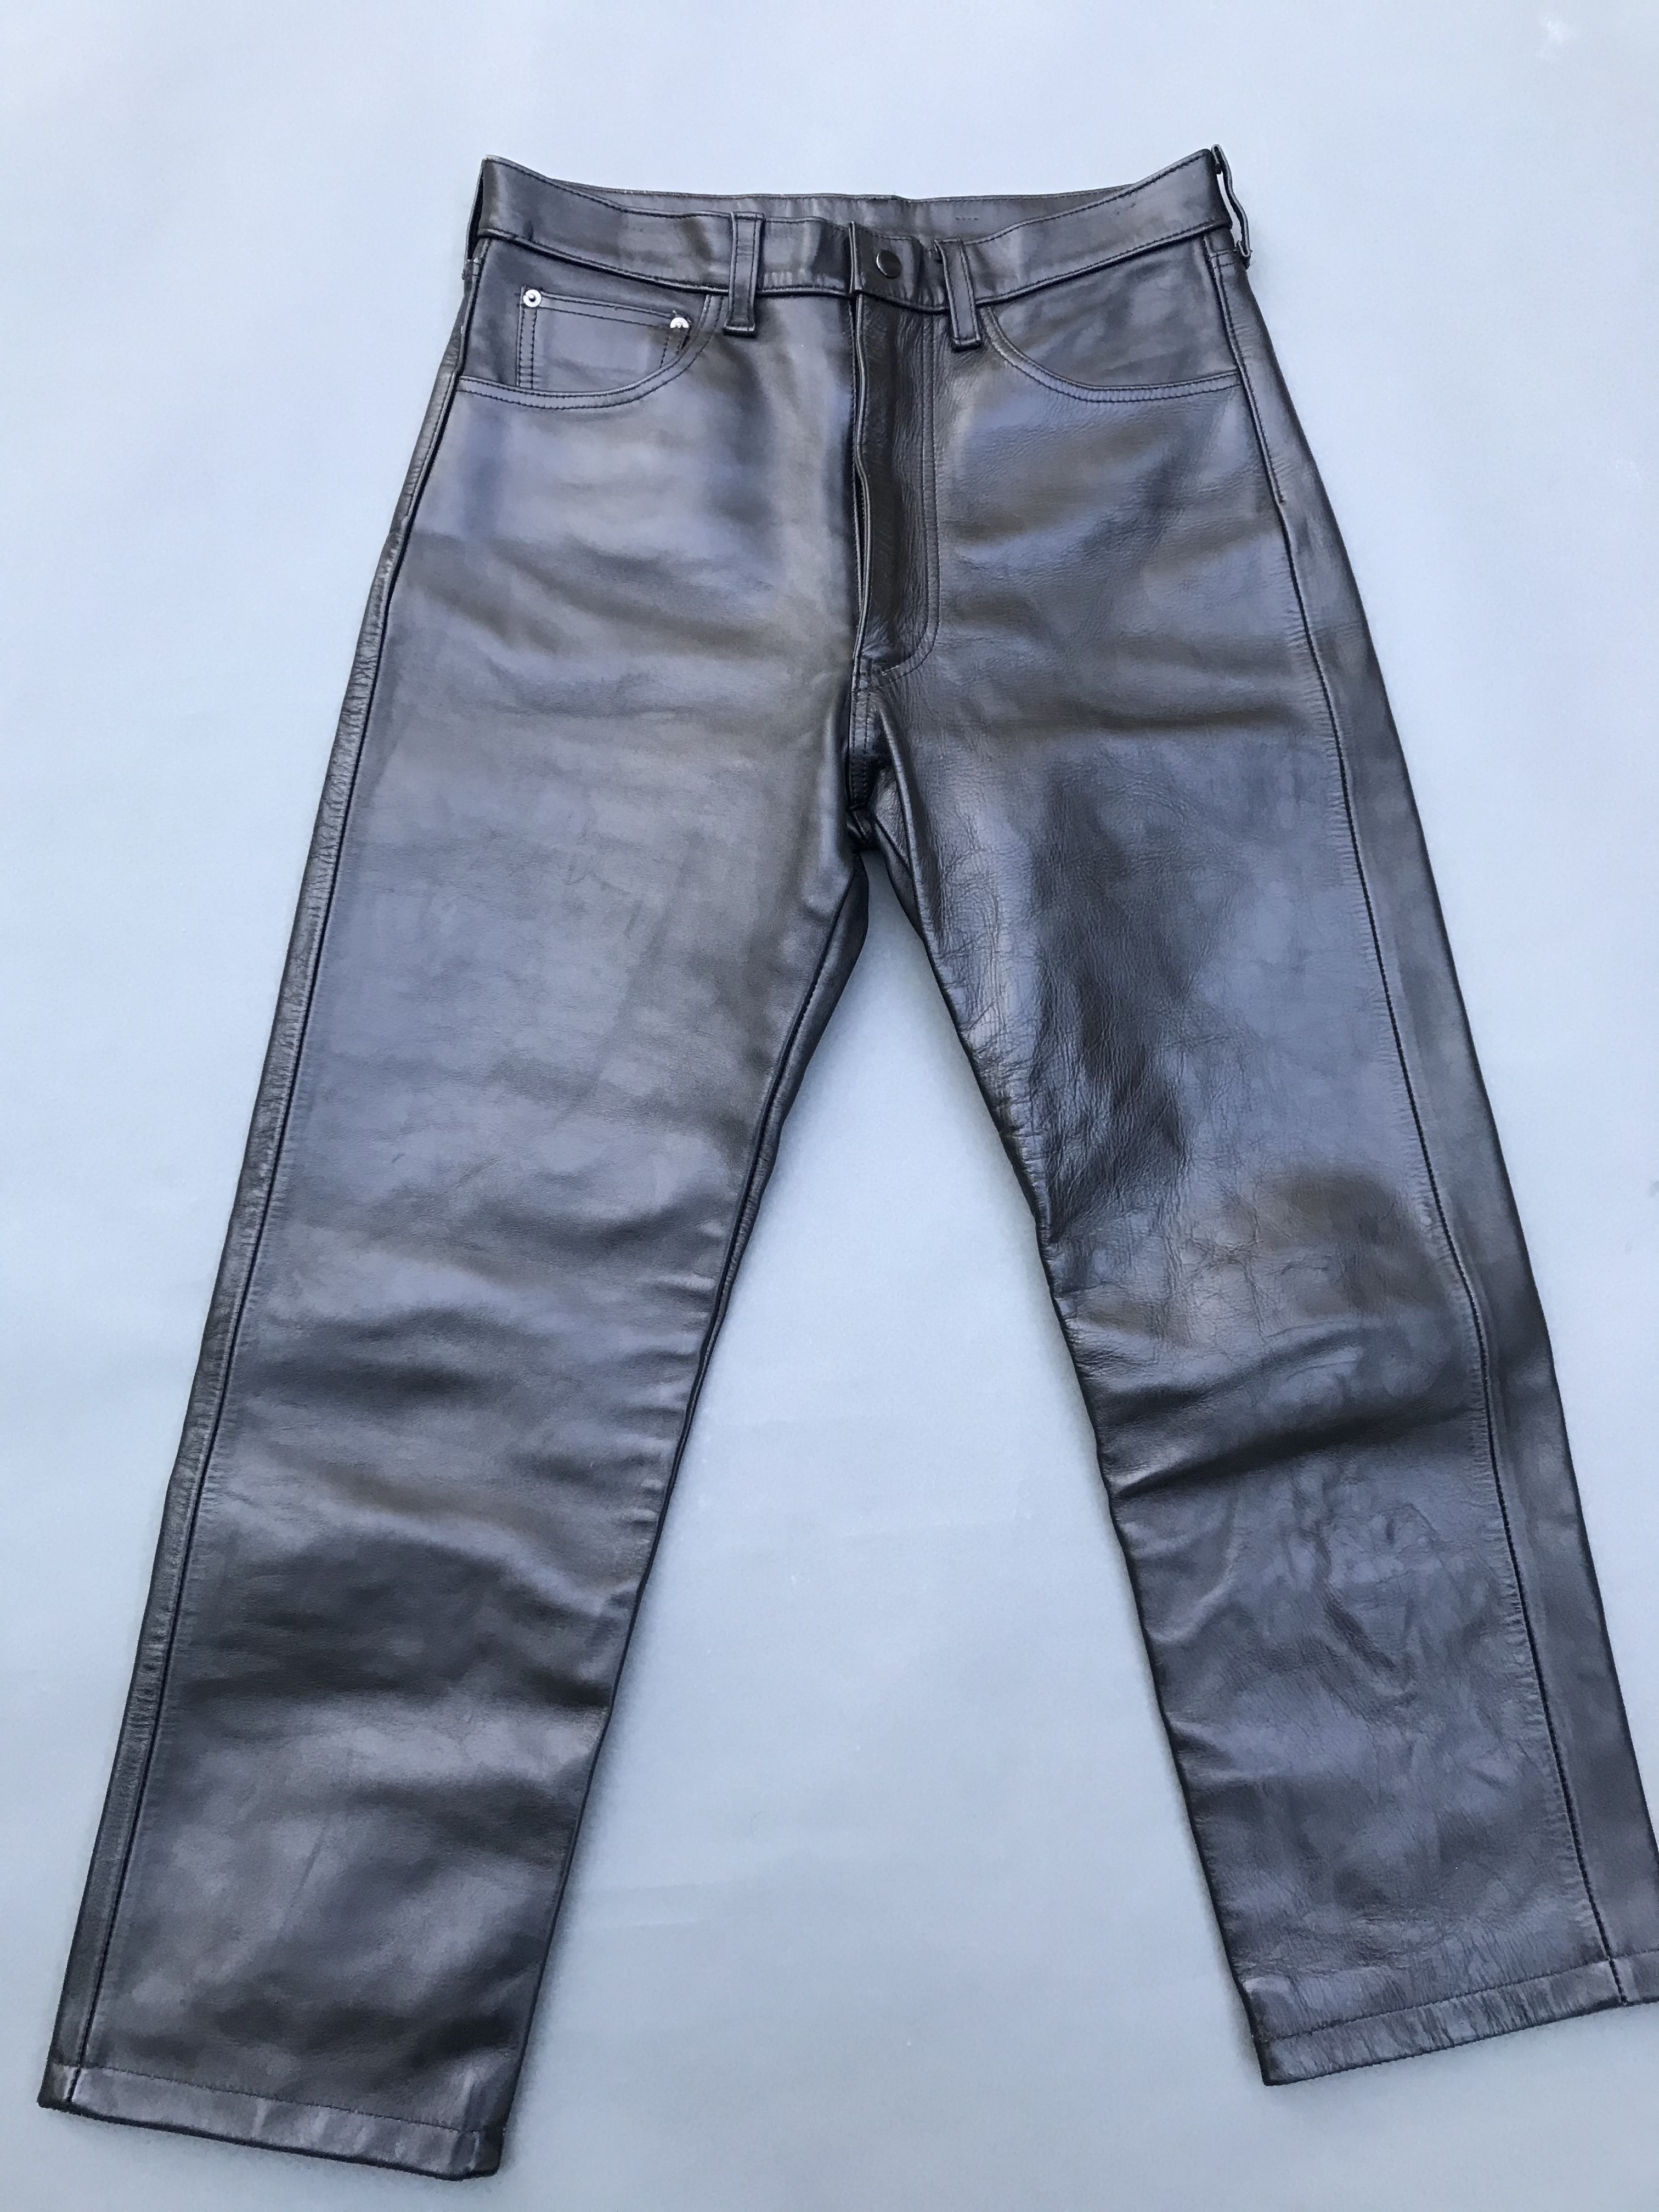 FS: Horsehide Pants/Jeans Size 33 | The Fedora Lounge